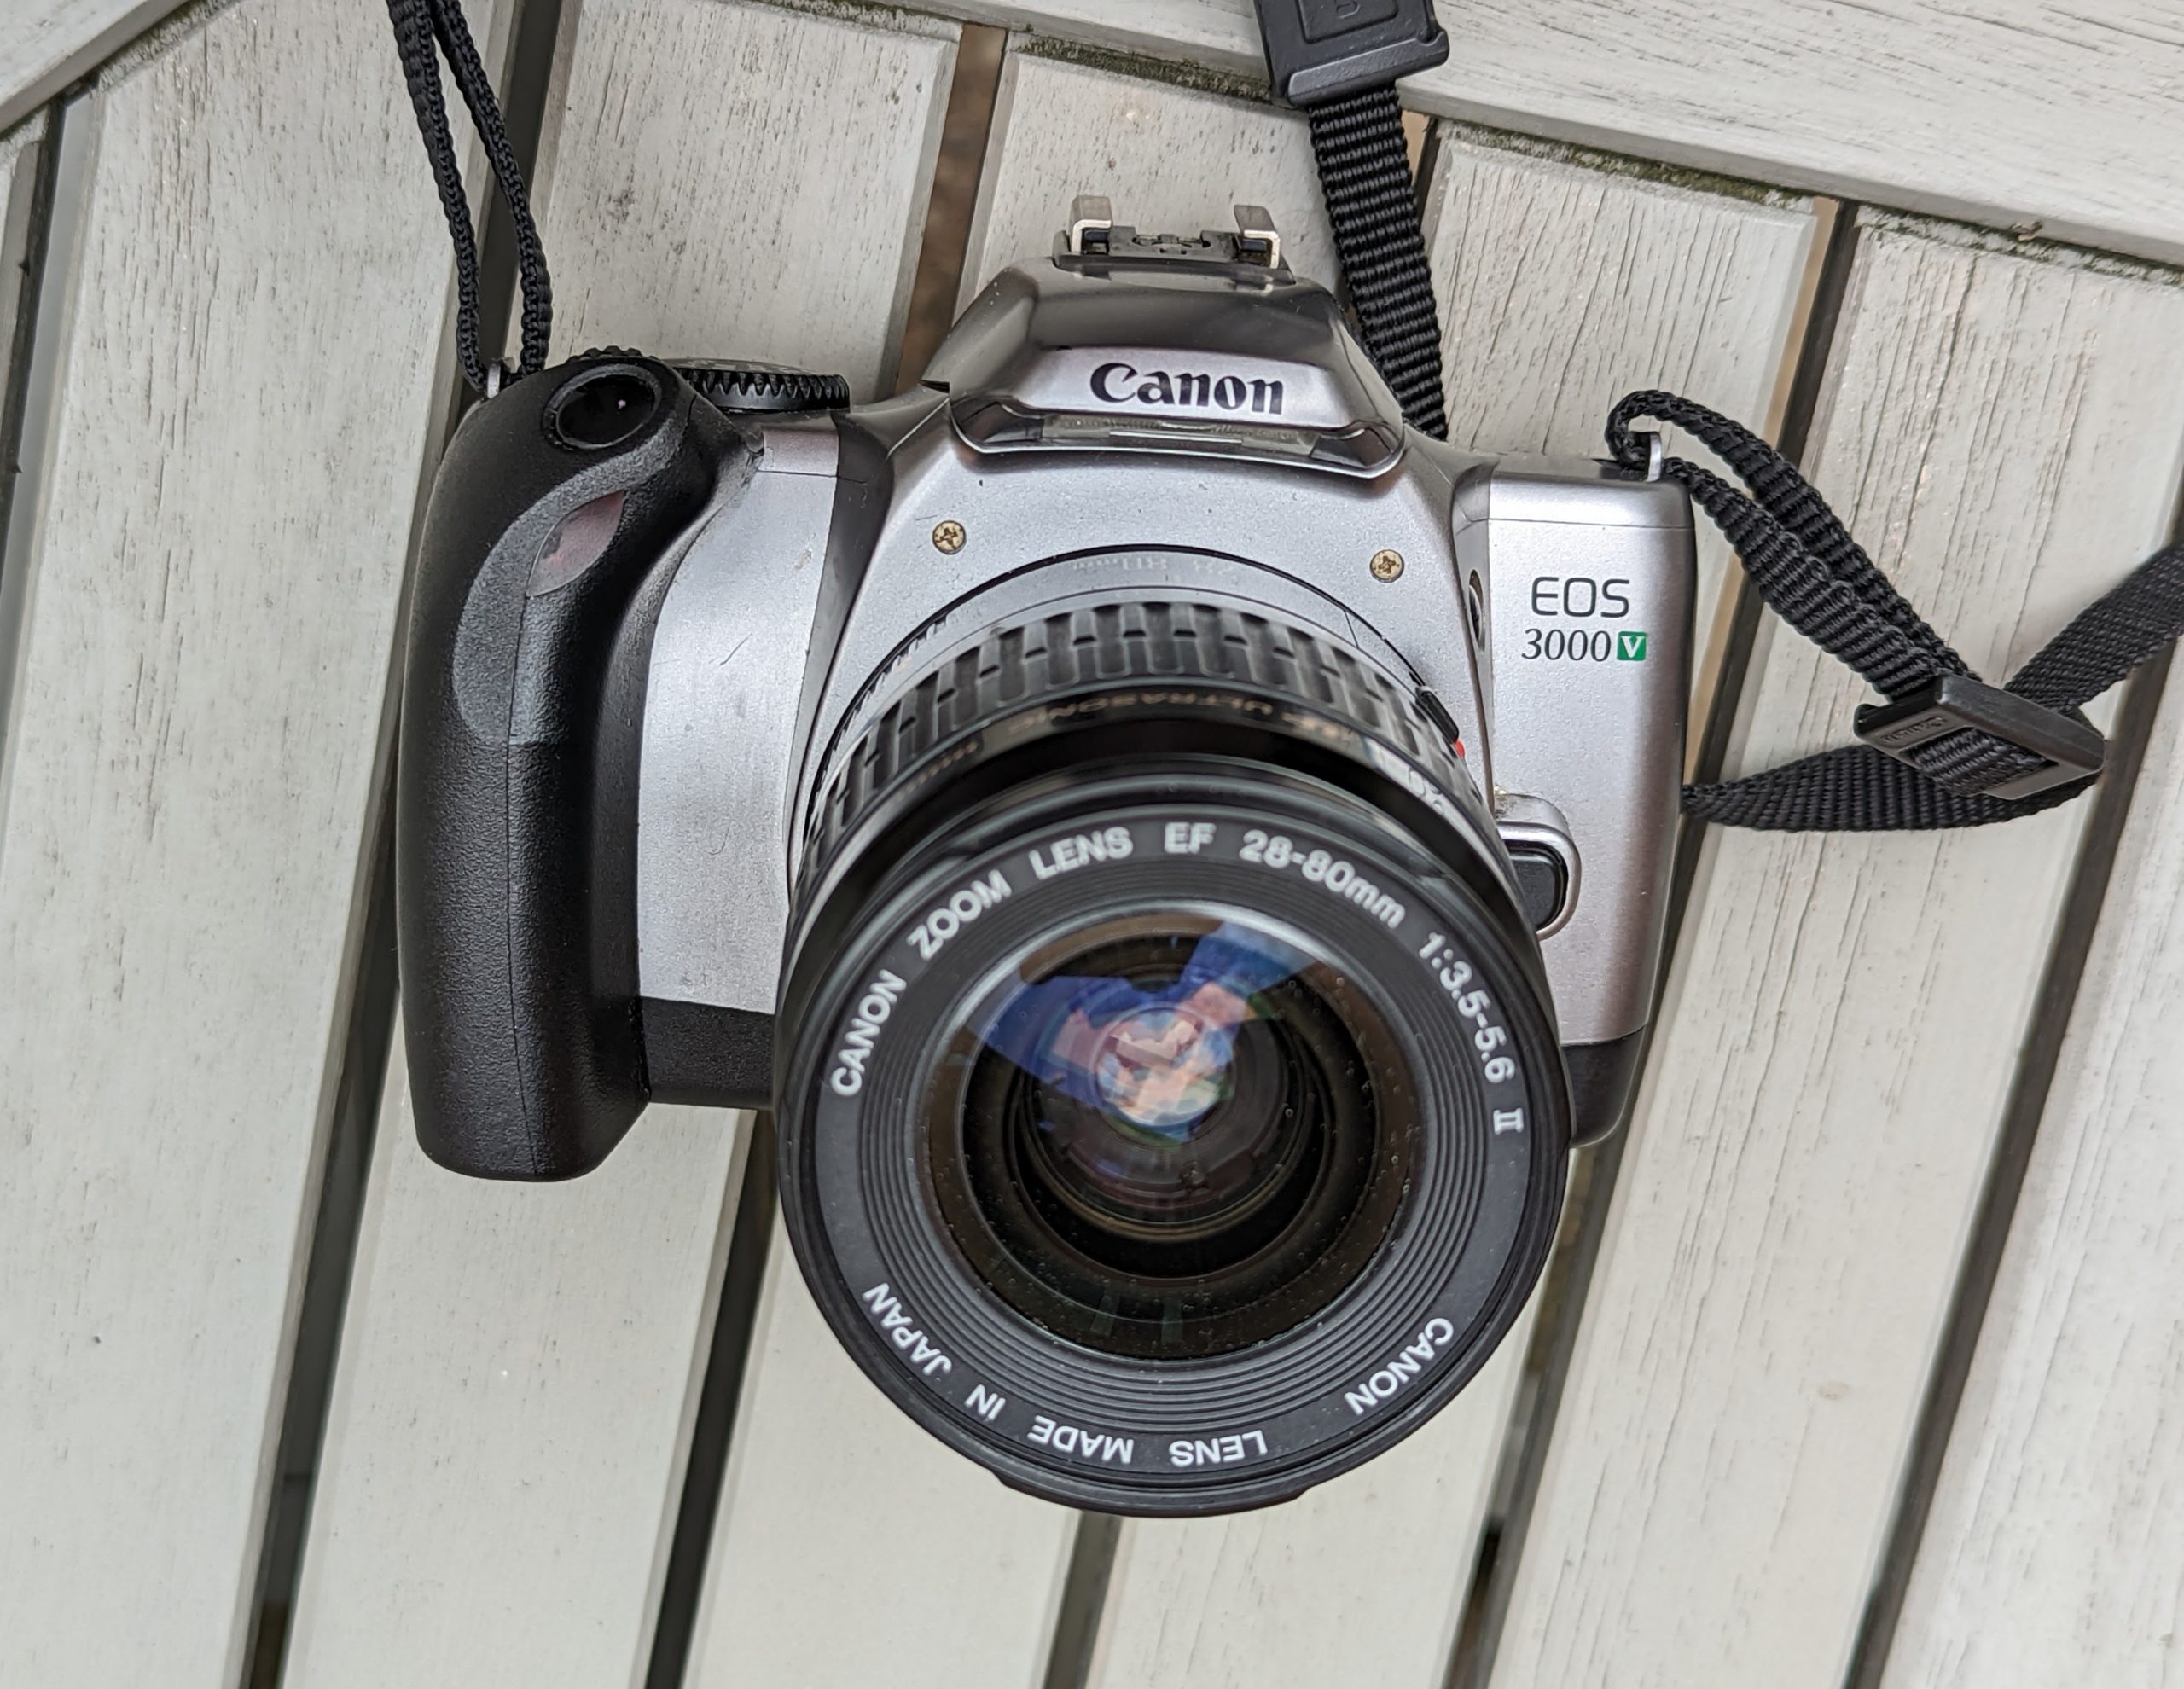 Canon EOS 3000V with Canon EF 28-80 1:3.5-5.6 II USM lens